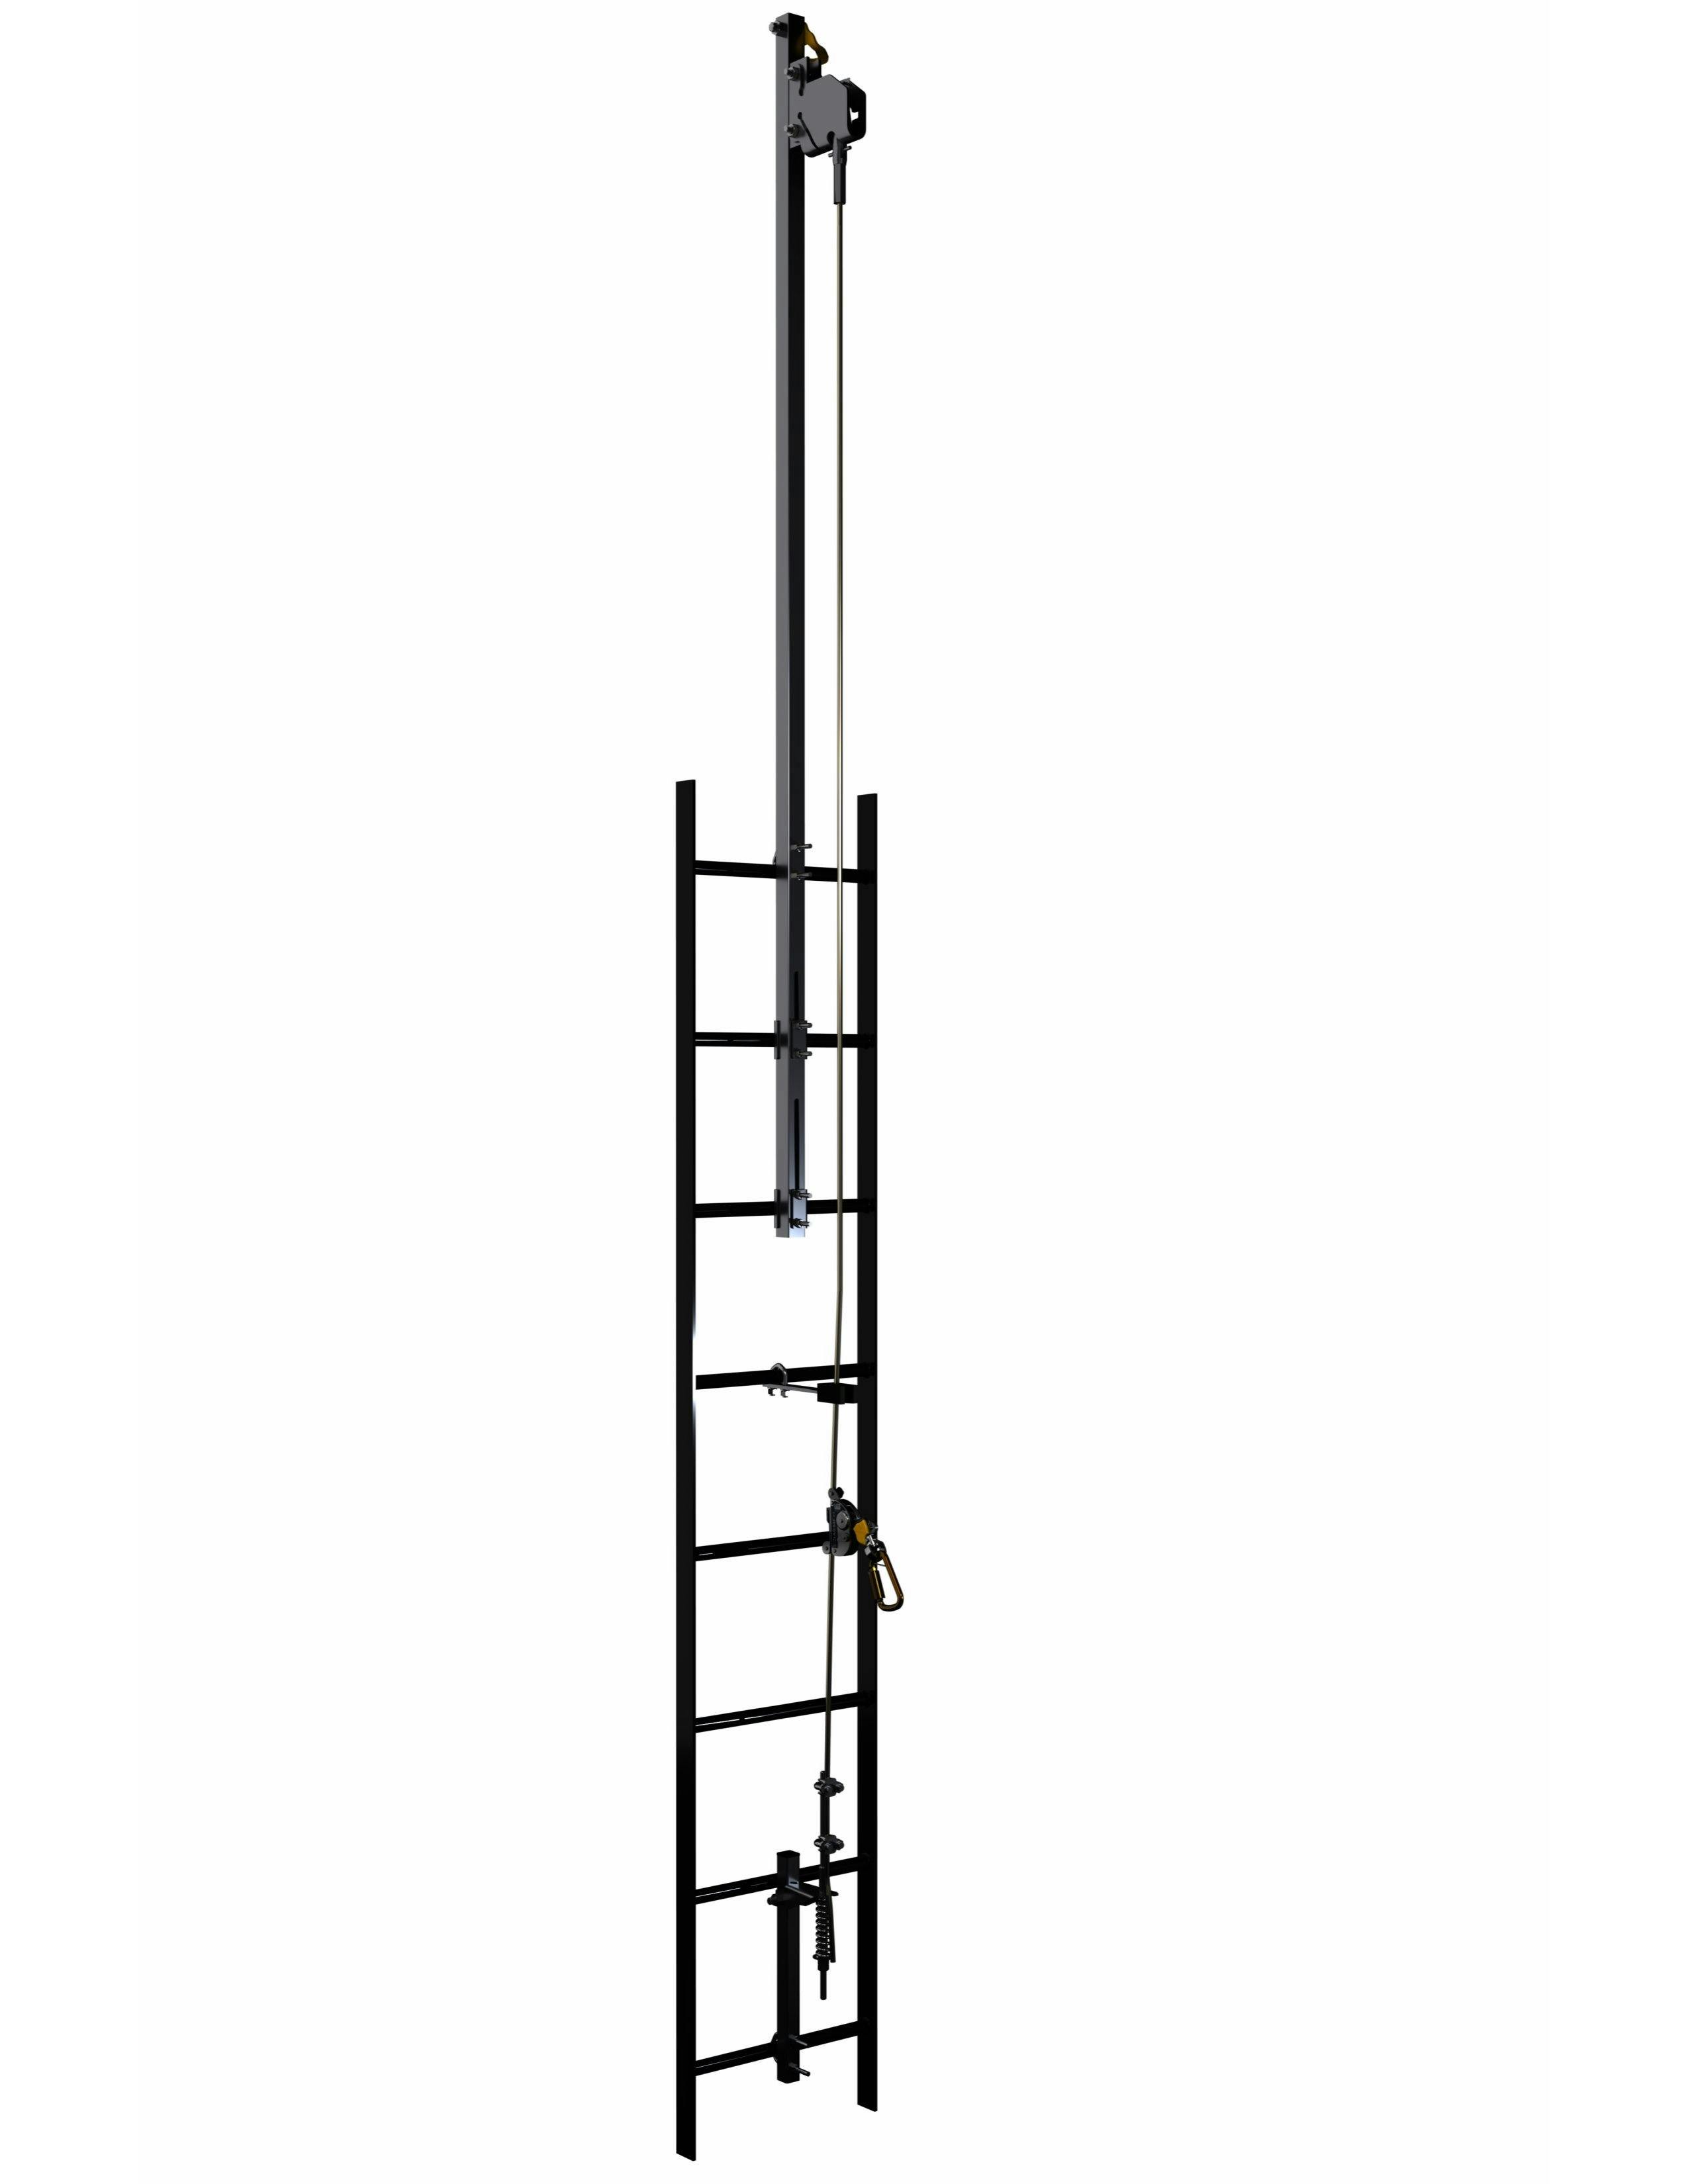 3M™ DBI-SALA® Lad-Saf™ Cable Vertical Safety System Bracketry, Climb Extension 6116636, 2 User, Stainless Steel, 1 EA